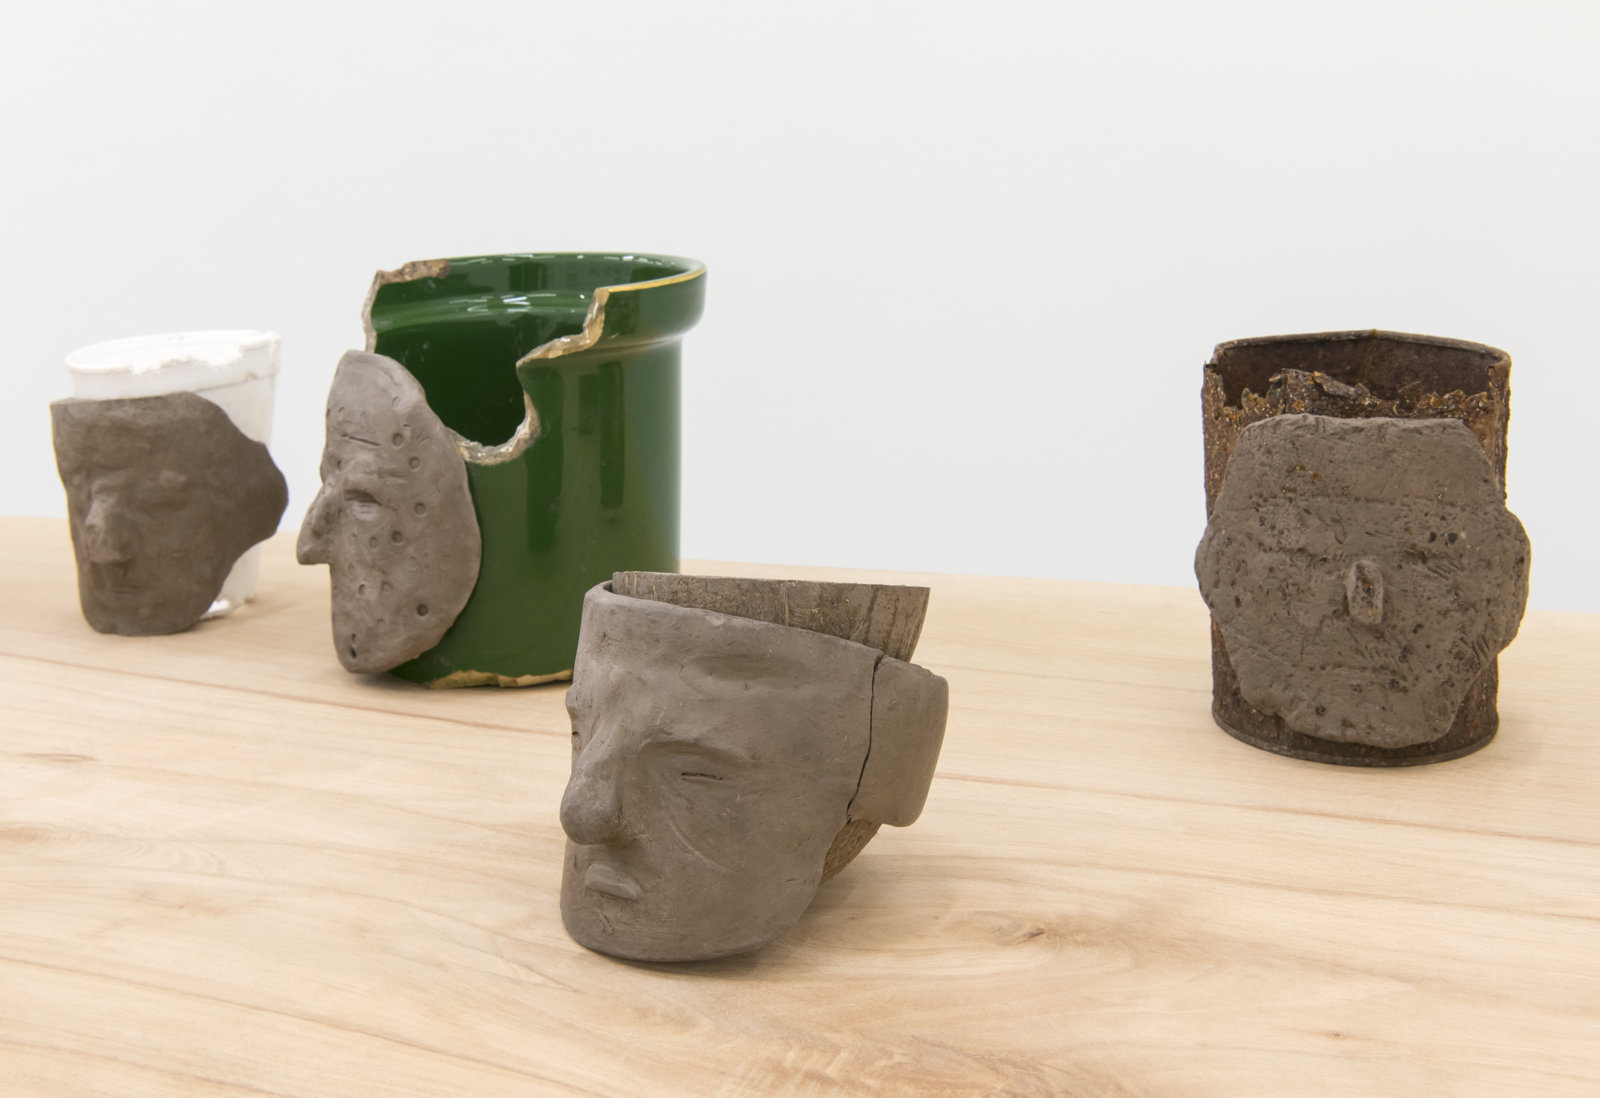 Ashes Withyman, Funeral Vessels (detail), 2014, found objects and unfired clay dredged from the Forth and Clyde canal, Glasgow, 40 x 96 x 23 in. (100 x 243 x 58 cm)